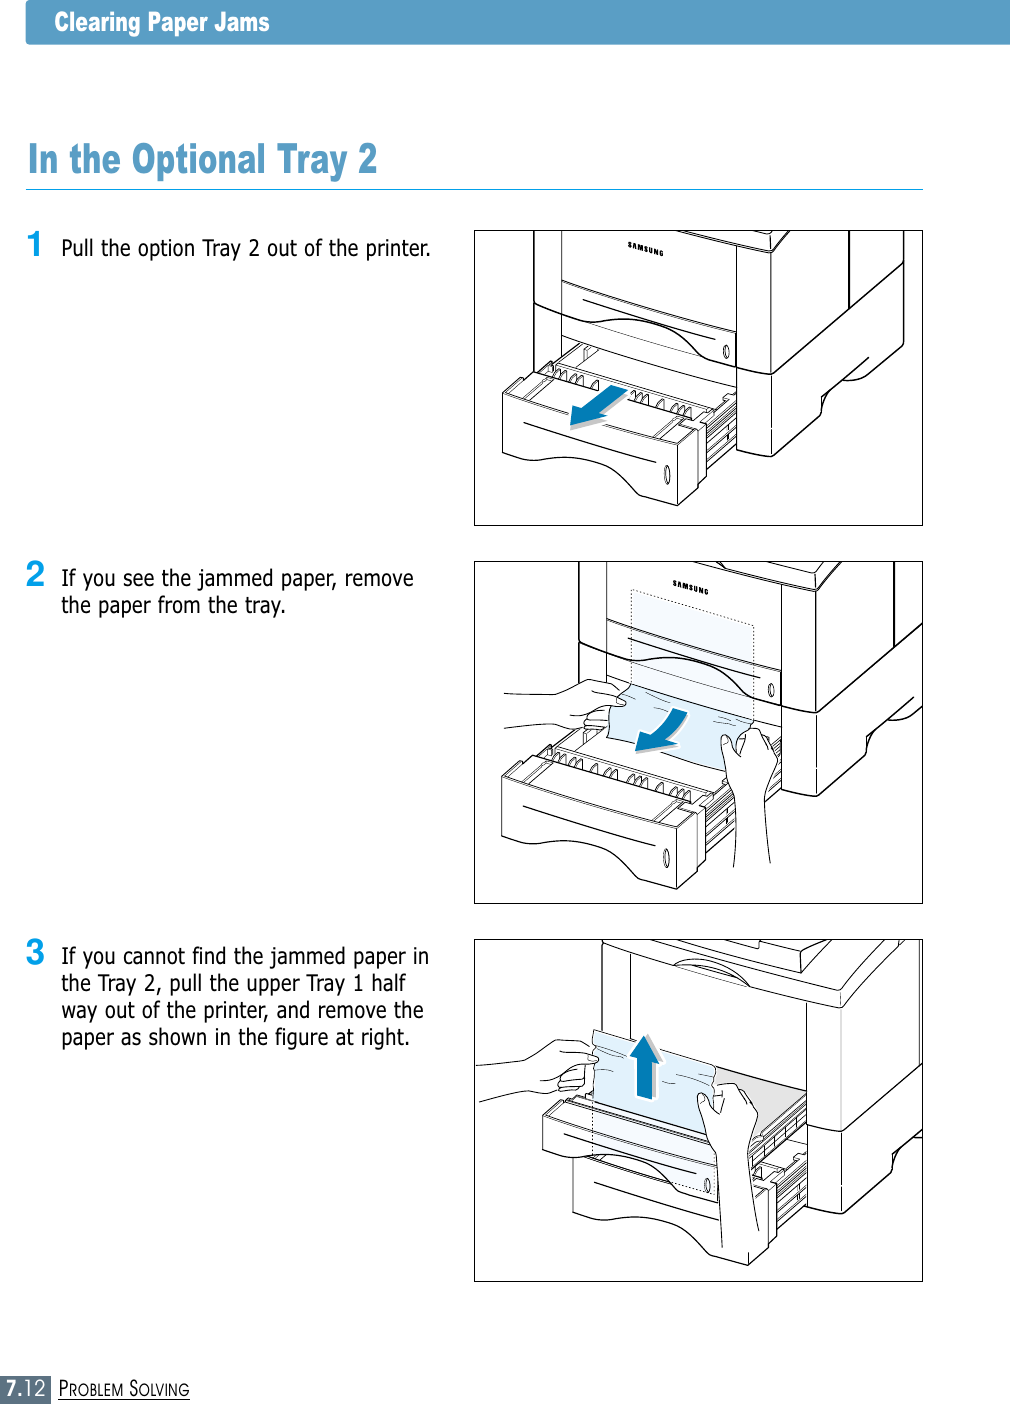 7.12PROBLEM SOLVINGClearing Paper JamsIn the Optional Tray 21Pull the option Tray 2 out of the printer.2If you see the jammed paper, removethe paper from the tray.3If you cannot find the jammed paper inthe Tray 2, pull the upper Tray 1 halfway out of the printer, and remove thepaper as shown in the figure at right.